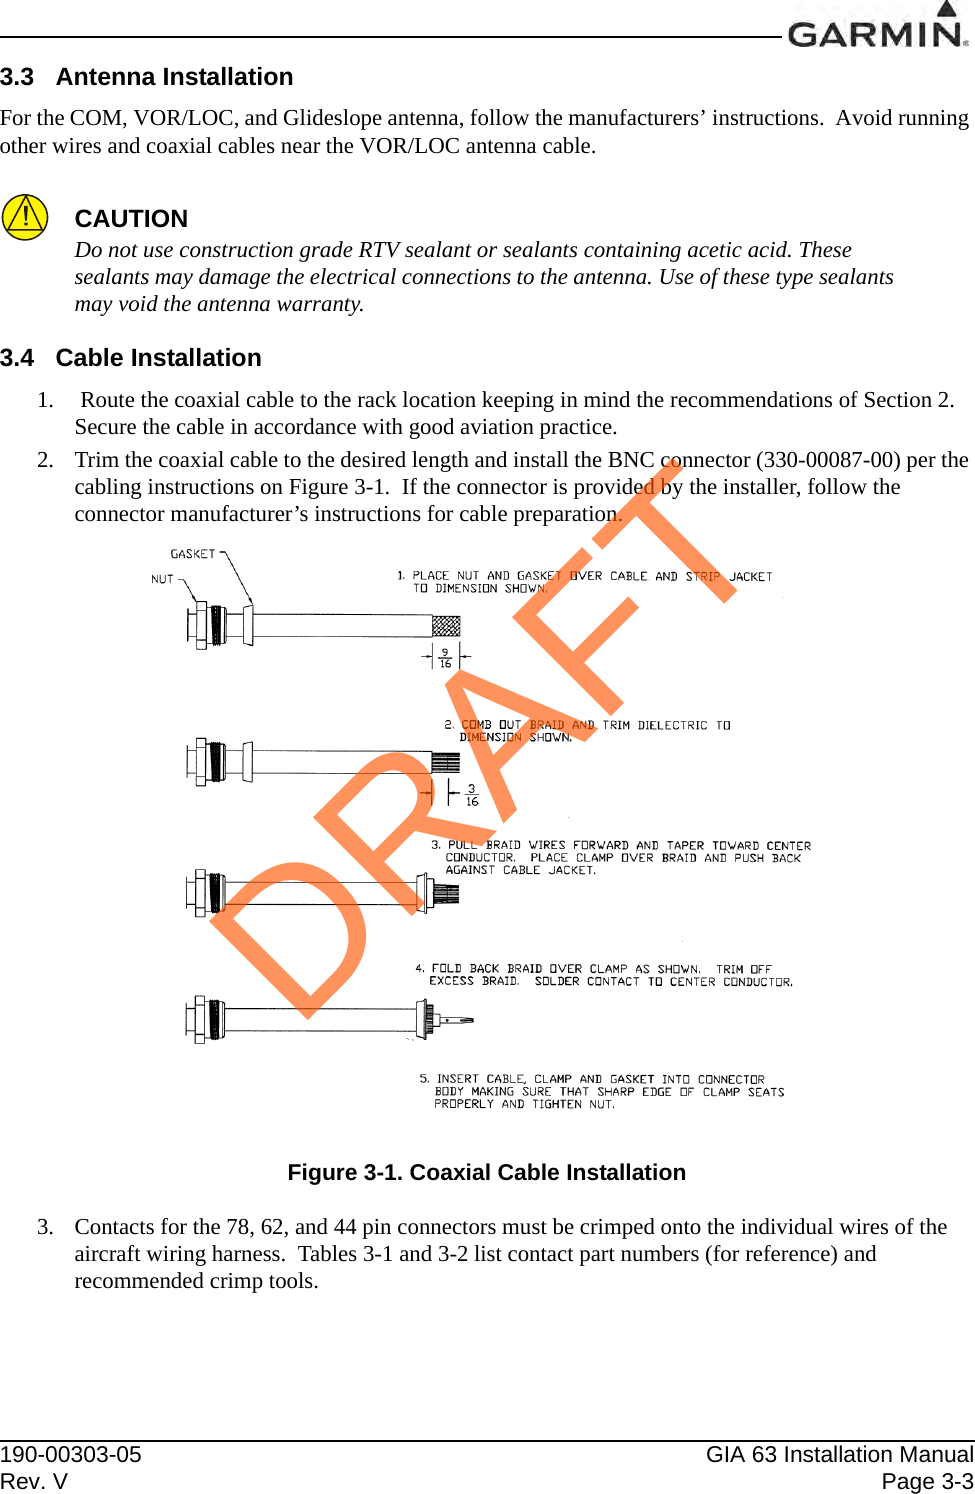 190-00303-05 GIA 63 Installation ManualRev. V Page 3-33.3 Antenna InstallationFor the COM, VOR/LOC, and Glideslope antenna, follow the manufacturers’ instructions.  Avoid running other wires and coaxial cables near the VOR/LOC antenna cable.CAUTIONDo not use construction grade RTV sealant or sealants containing acetic acid. These sealants may damage the electrical connections to the antenna. Use of these type sealants may void the antenna warranty.3.4 Cable Installation1.  Route the coaxial cable to the rack location keeping in mind the recommendations of Section 2.  Secure the cable in accordance with good aviation practice.2. Trim the coaxial cable to the desired length and install the BNC connector (330-00087-00) per the cabling instructions on Figure 3-1.  If the connector is provided by the installer, follow the connector manufacturer’s instructions for cable preparation.Figure 3-1. Coaxial Cable Installation3. Contacts for the 78, 62, and 44 pin connectors must be crimped onto the individual wires of the aircraft wiring harness.  Tables 3-1 and 3-2 list contact part numbers (for reference) and recommended crimp tools.DRAFT